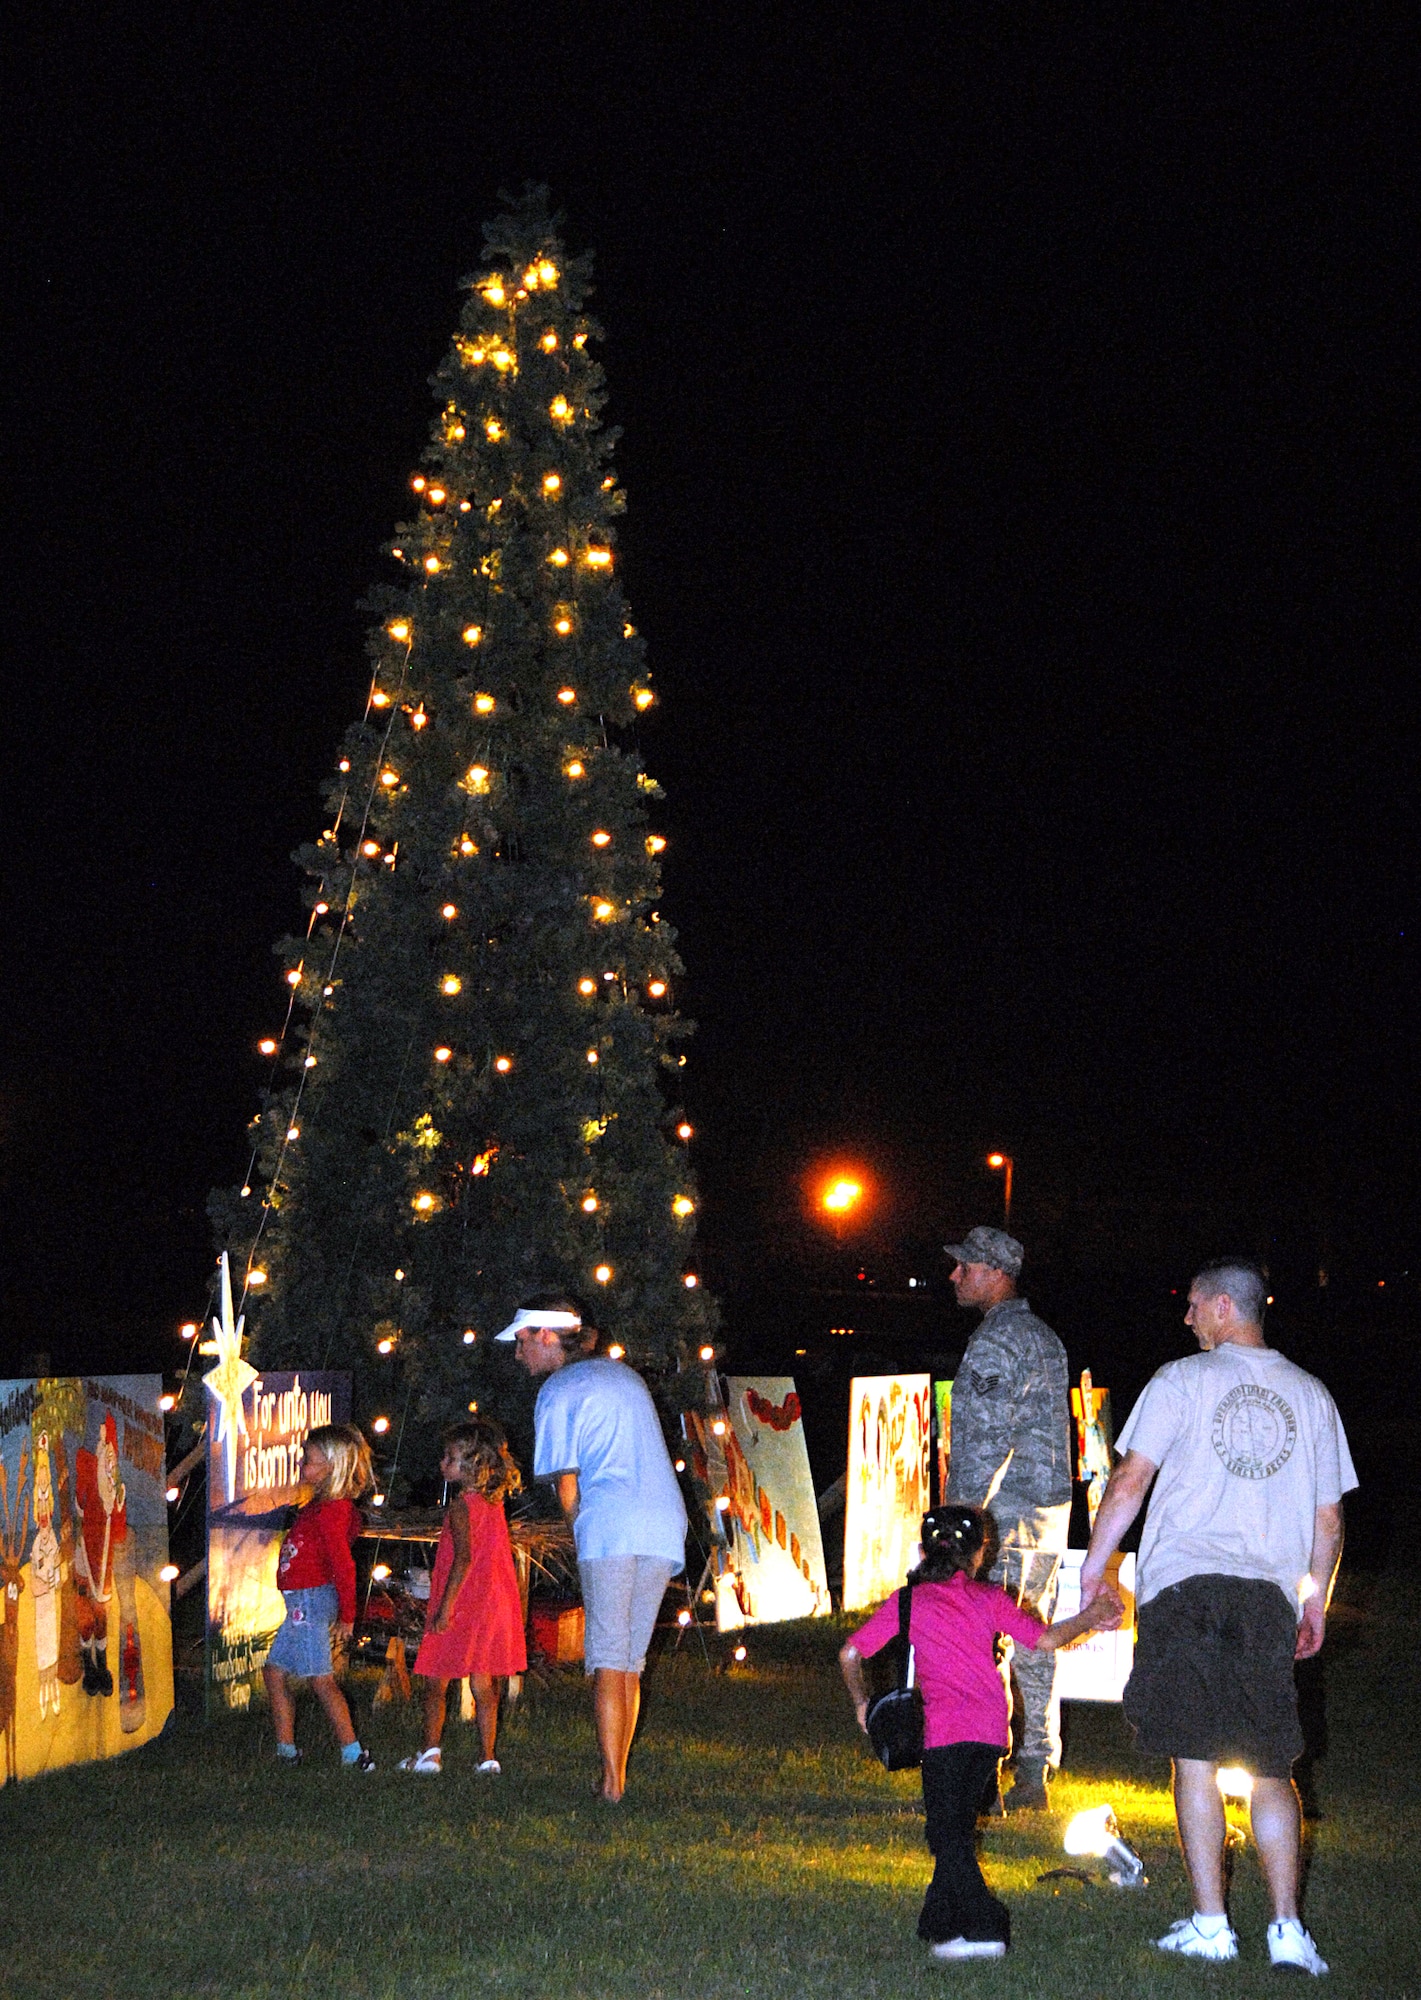 ANDERSEN AIR FORCE BASE, Guam -- Team Andersen members look at the newly lit base Christmas tree at Arc Light Park Dec. 4. Both McGruff the Crime Dog and Santa were in attendance at the ceremony. (U.S. Air Force photo by Ralph Ridgeway)